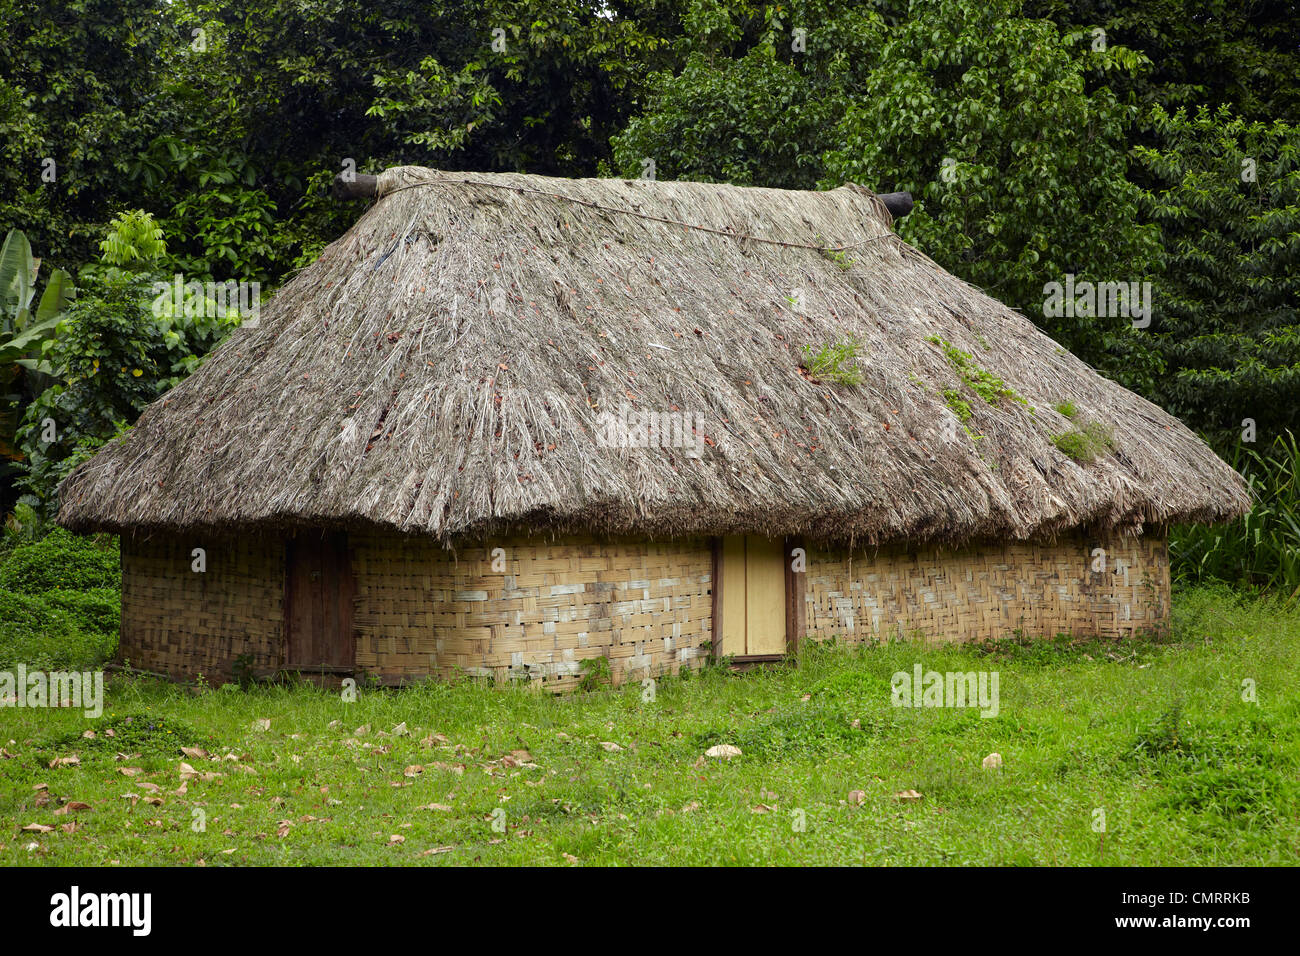 Traditional Fijian house with thatched roof, Coral Coast, Viti Levu, Fiji, South Pacific Stock Photo